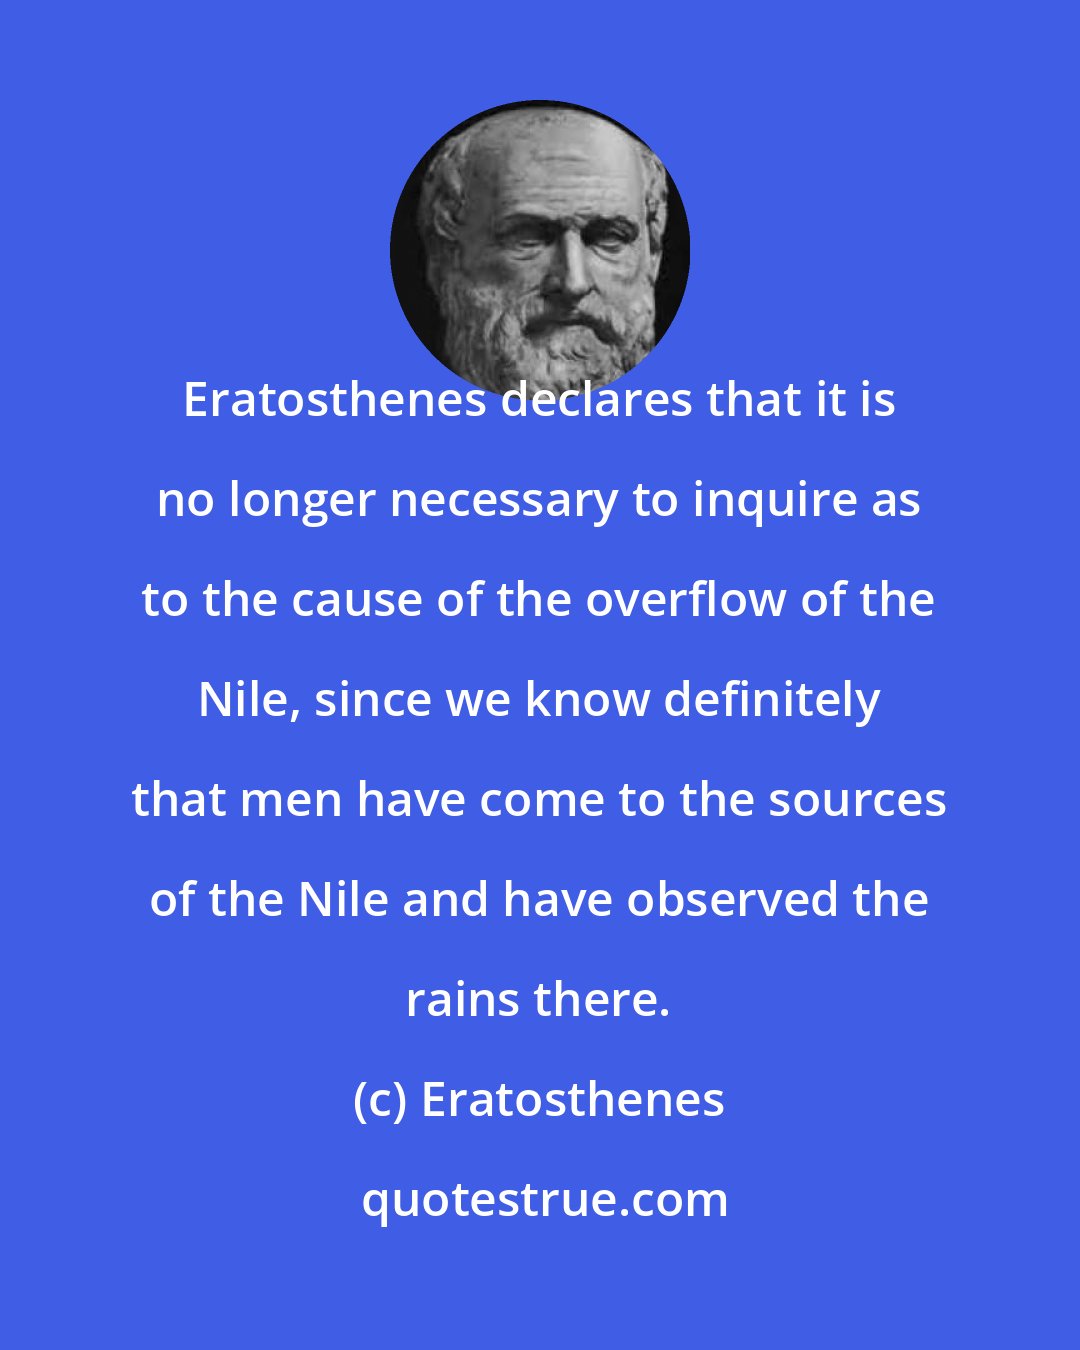 Eratosthenes: Eratosthenes declares that it is no longer necessary to inquire as to the cause of the overflow of the Nile, since we know definitely that men have come to the sources of the Nile and have observed the rains there.